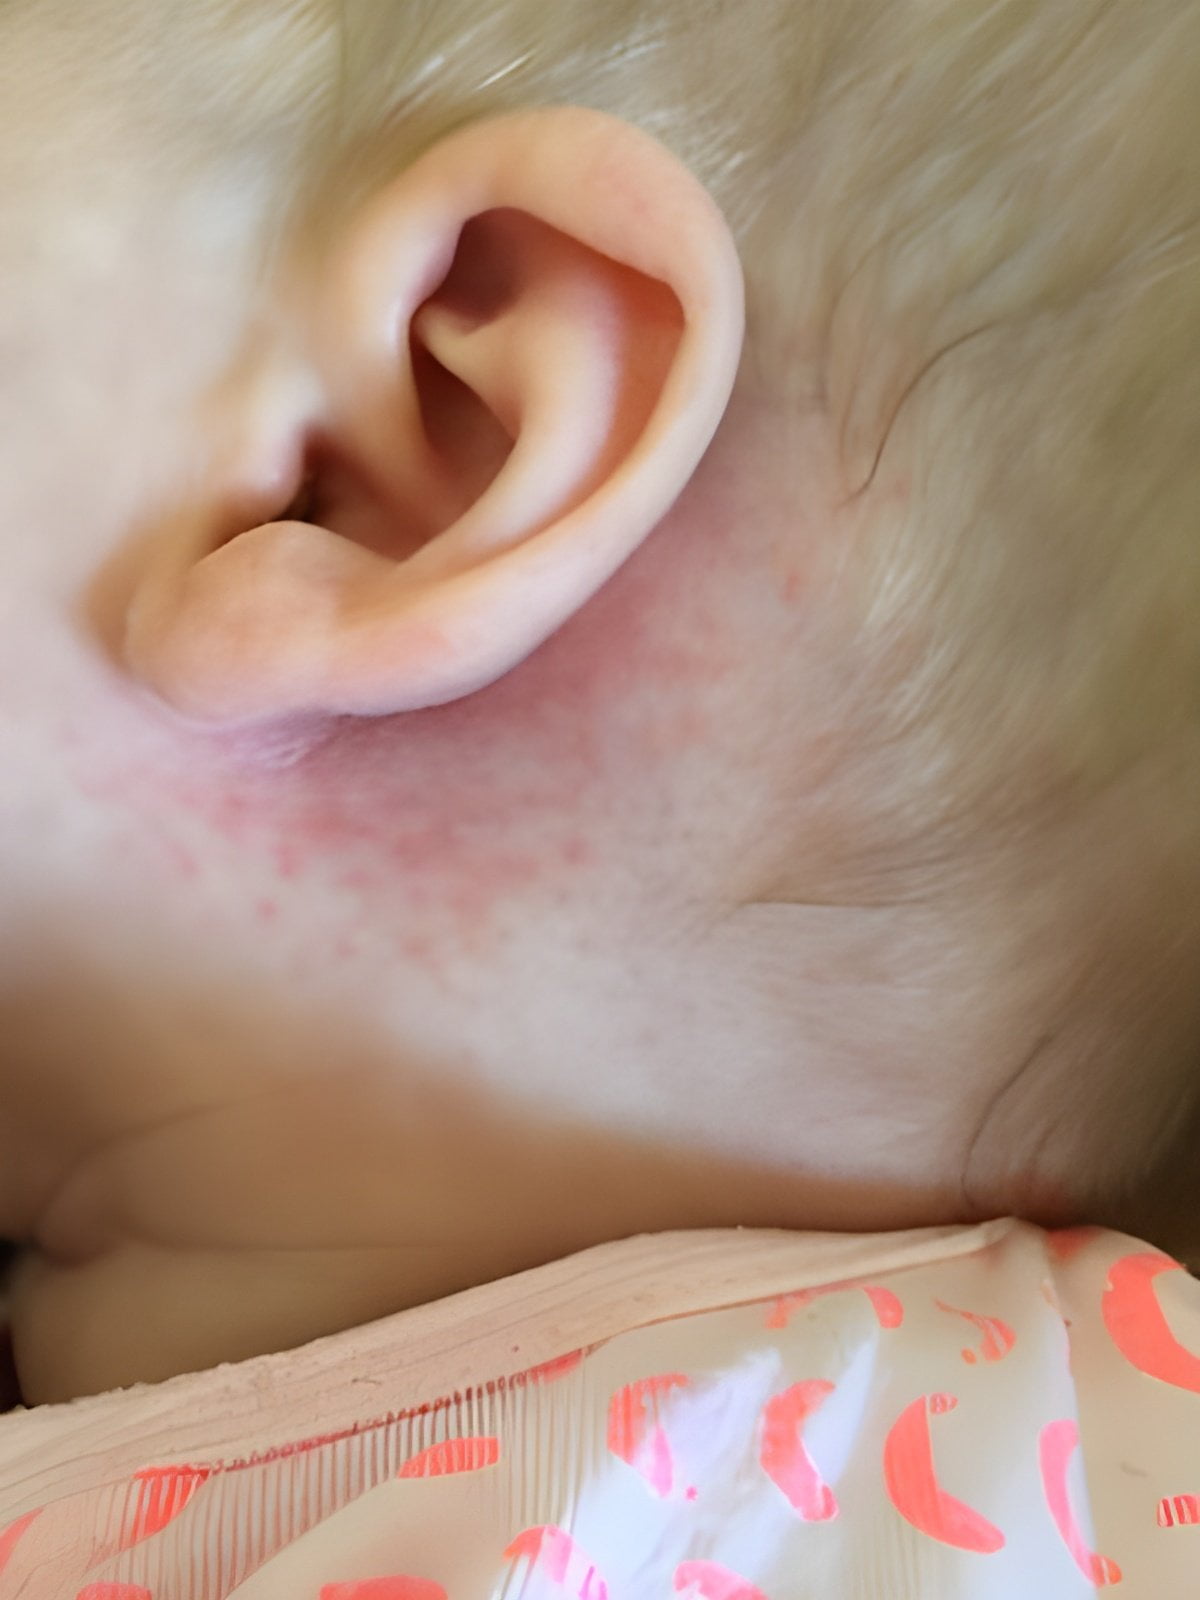 Rash behind the ear in a baby and toddler